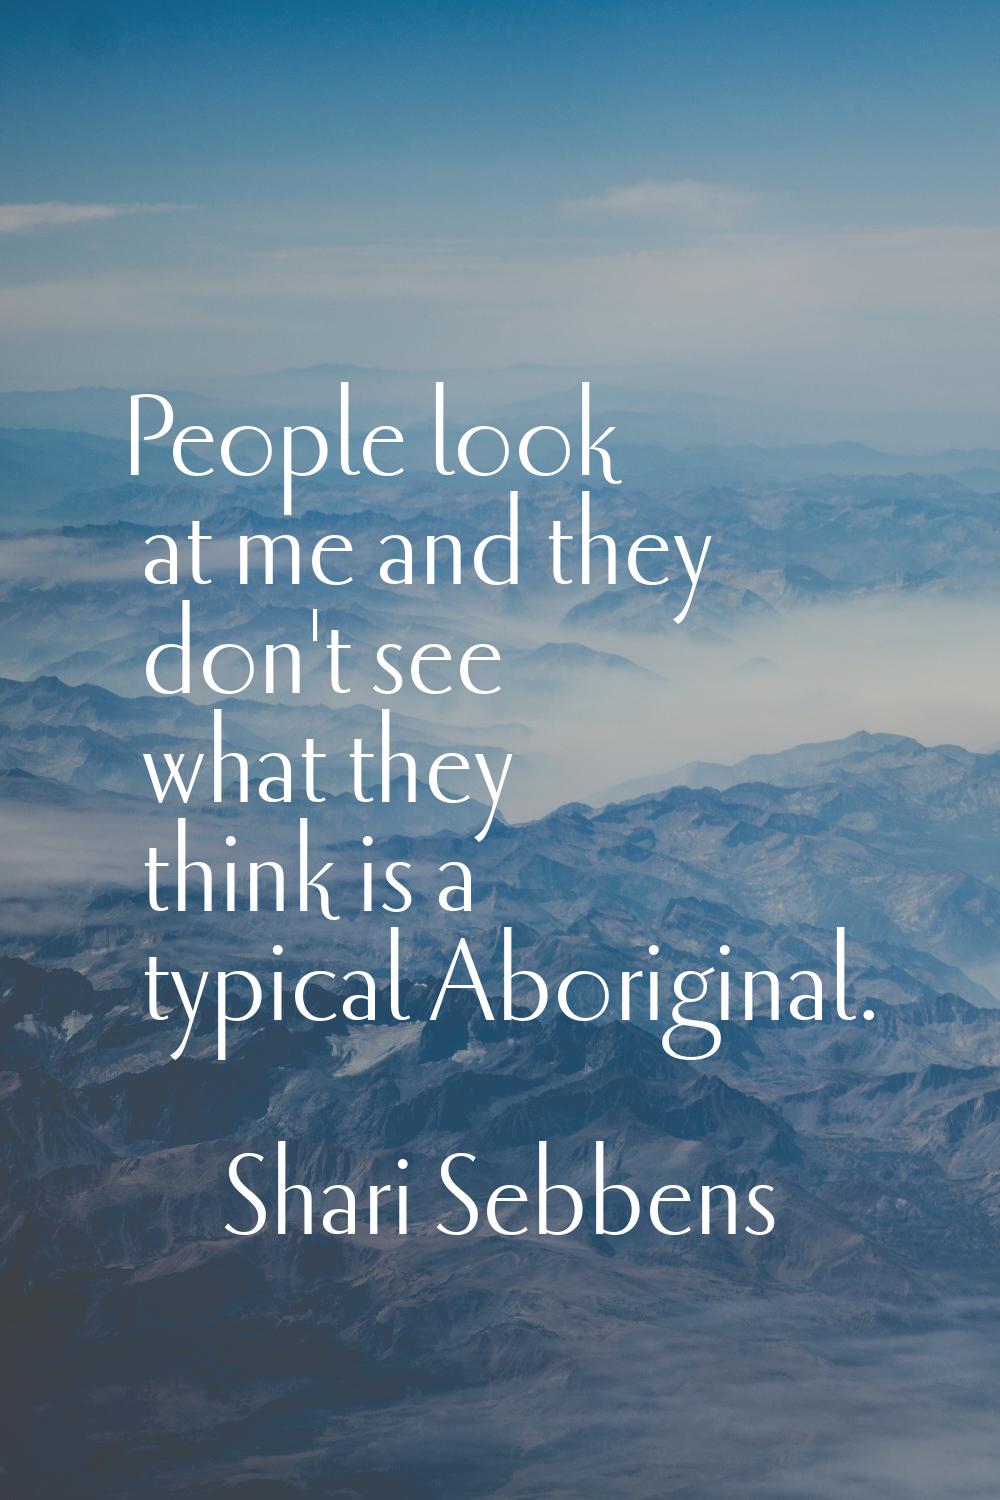 People look at me and they don't see what they think is a typical Aboriginal.